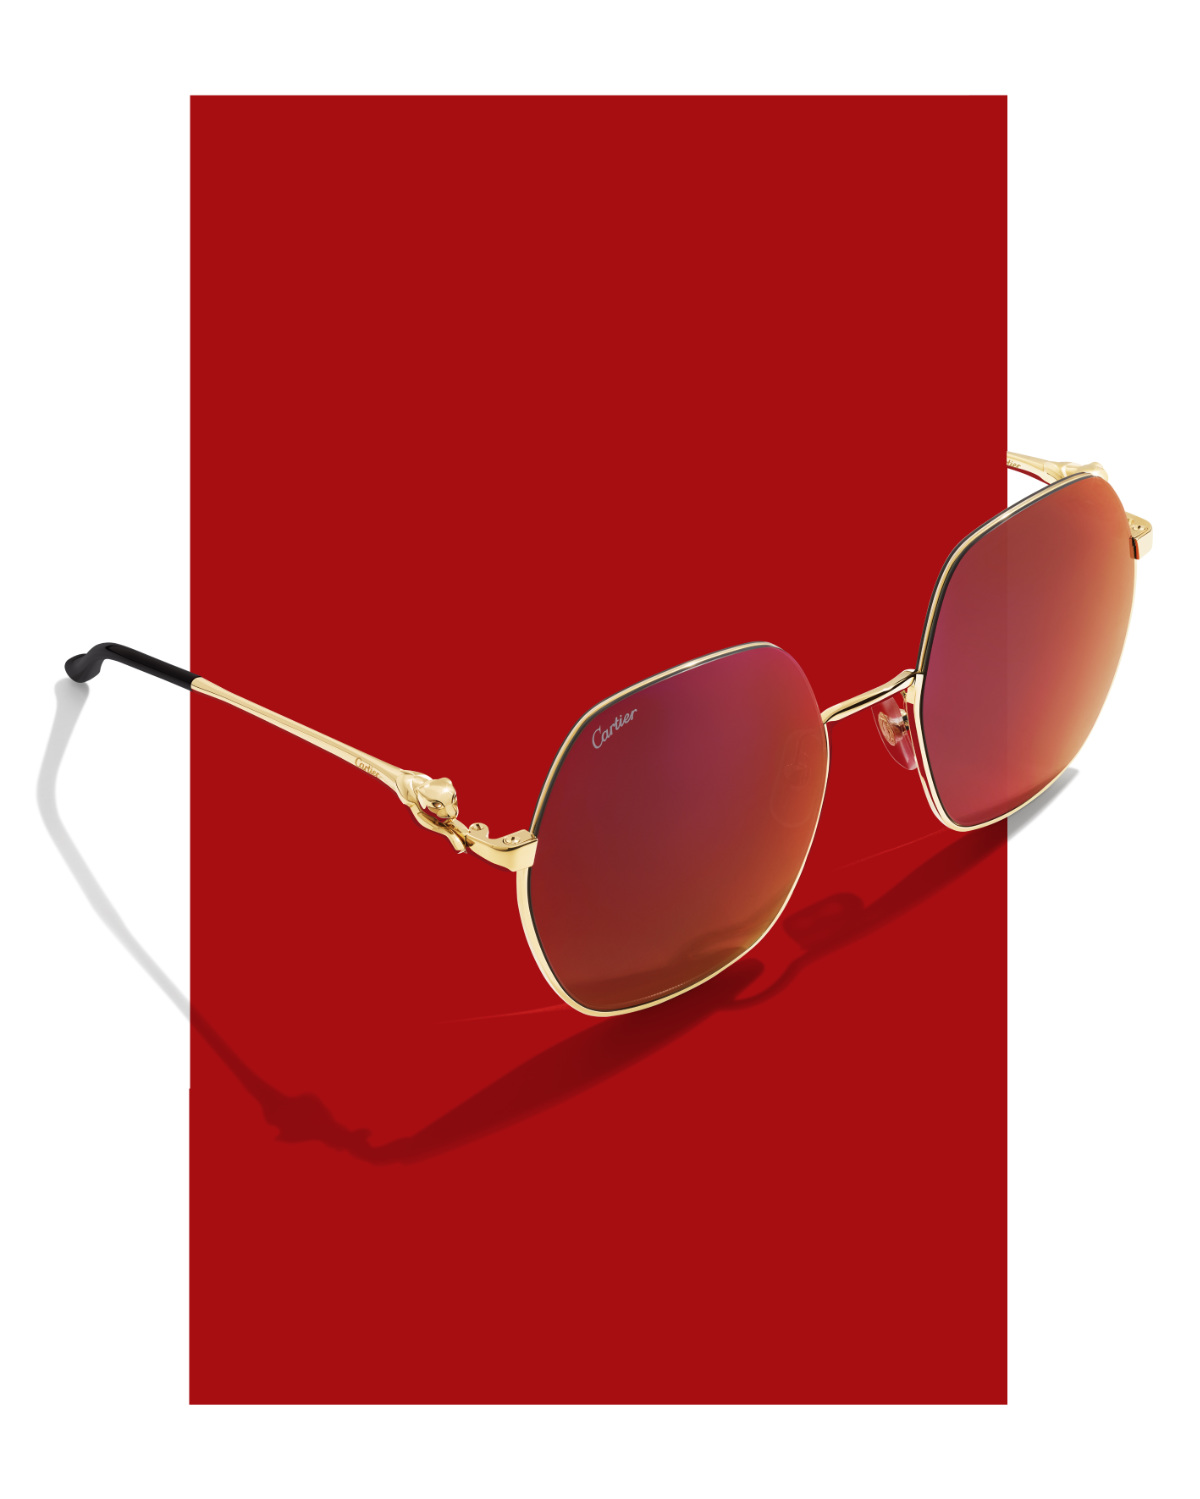 See The New Elegant Cartier's Spring/Summer 2021 Eyewear Collection